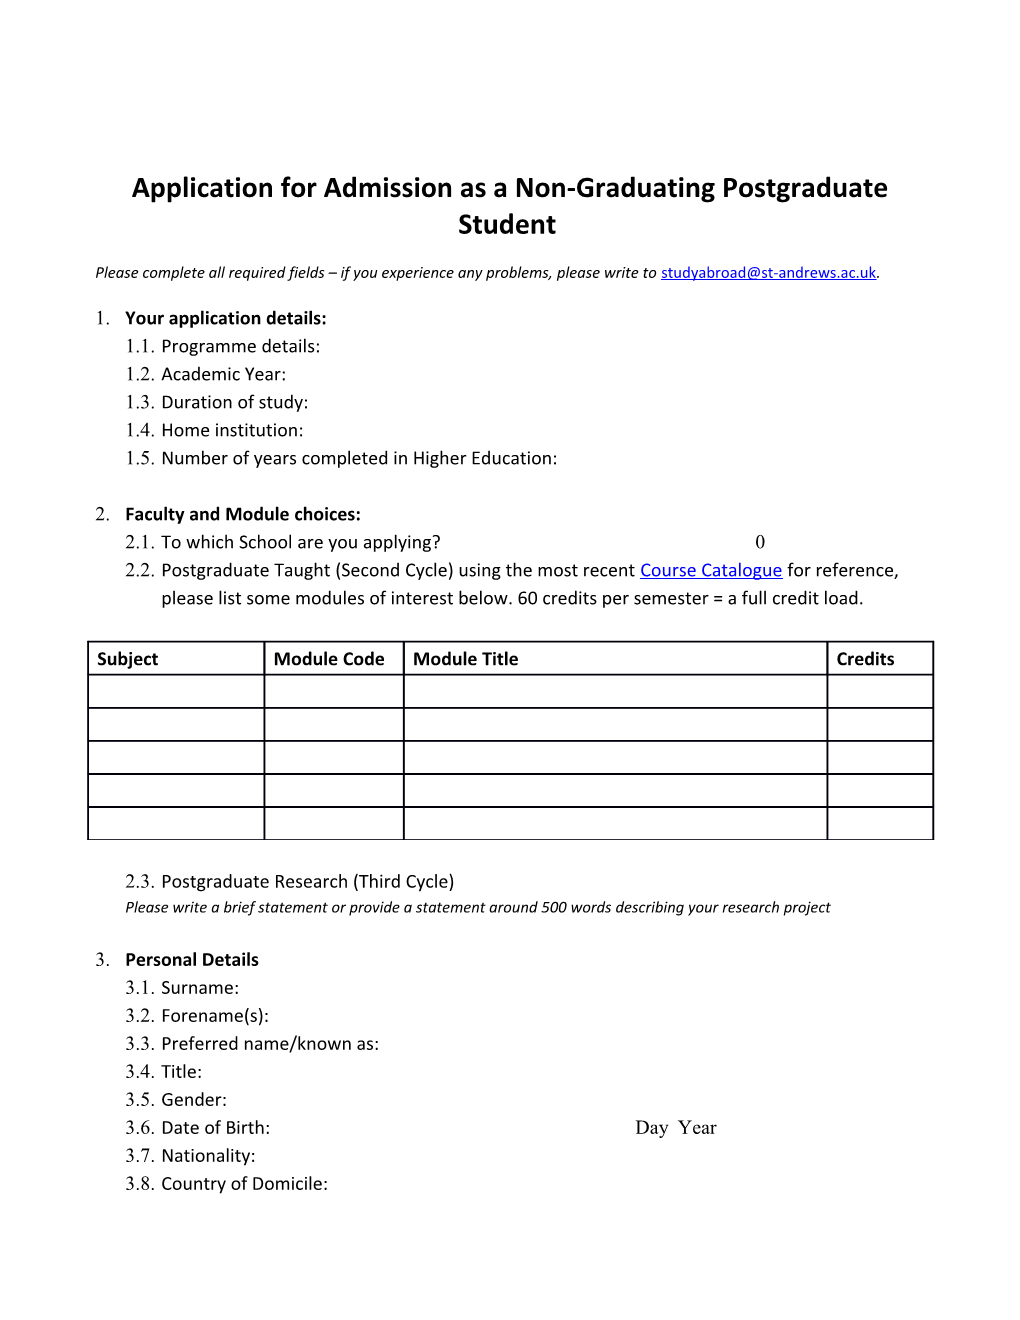 Application for Admission As a Non-Graduating Postgraduate Student